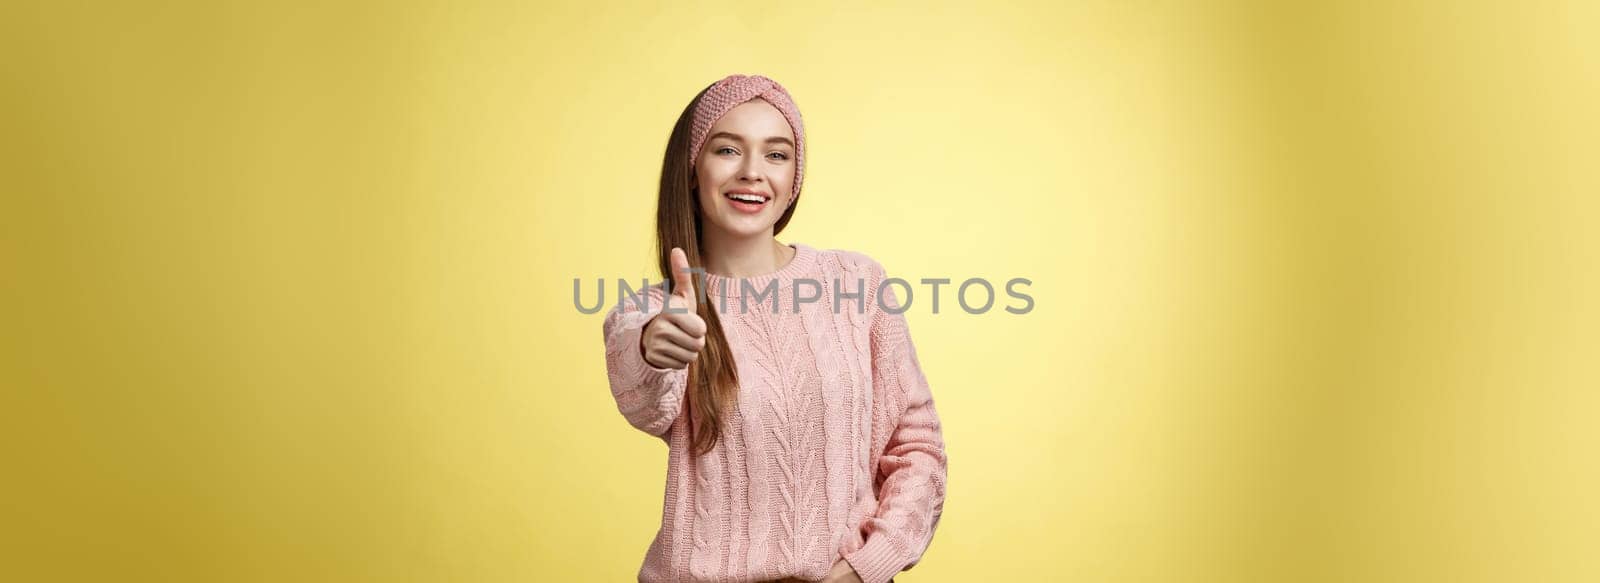 Gestures, emotions and lifestlyle concept. Self-assured positive 20s european woman wearing casual sweater over yellow background showing thumb up gesture, approving, accepting and liking concept.